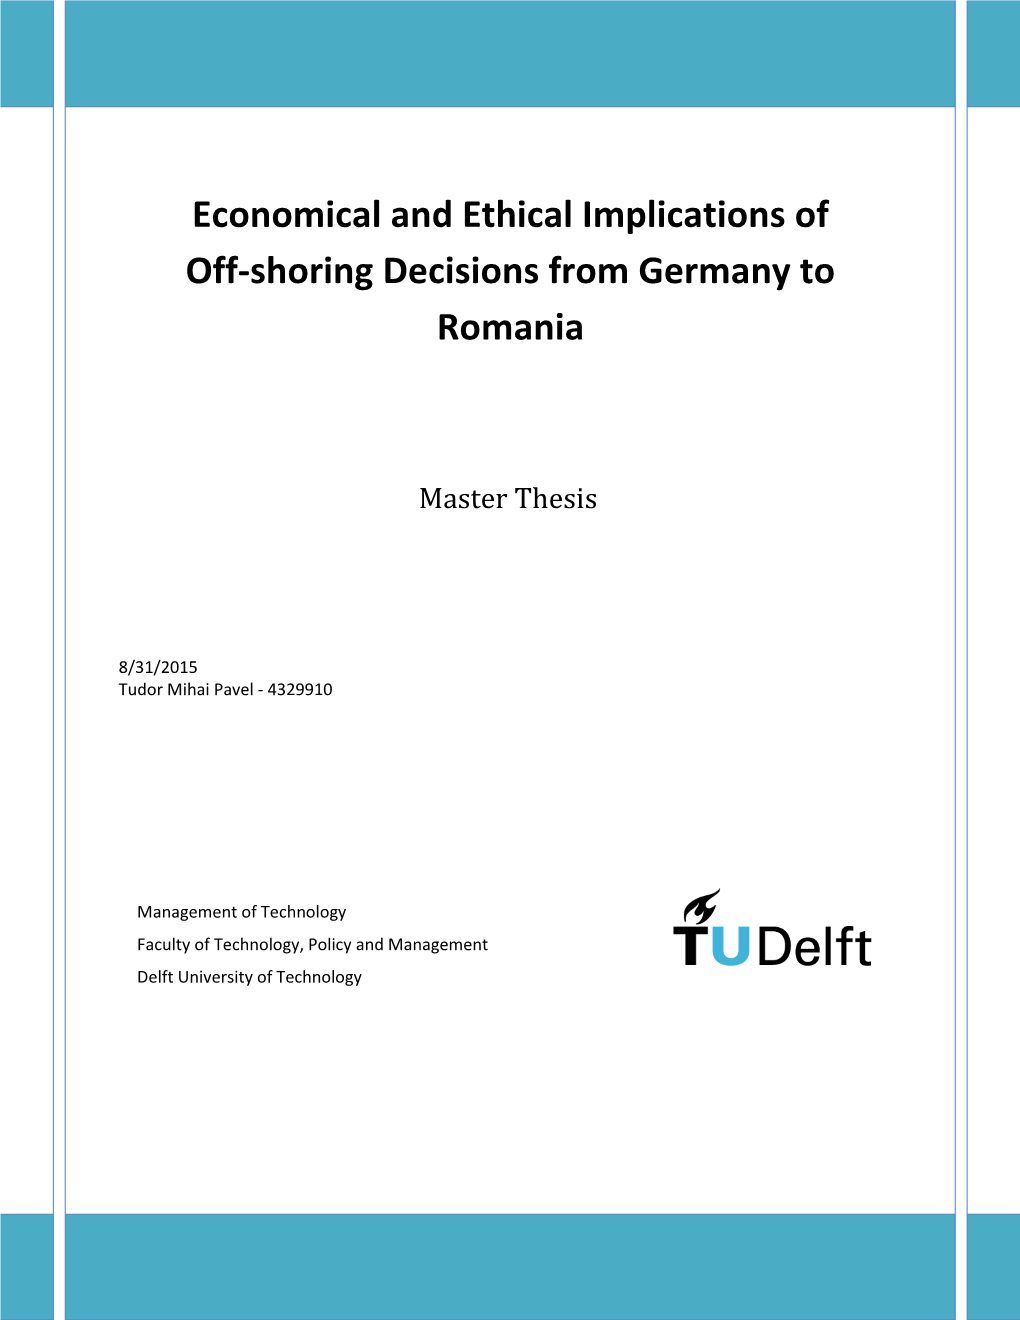 Economical and Ethical Implications of Off-Shoring Decisions from Germany to Romania